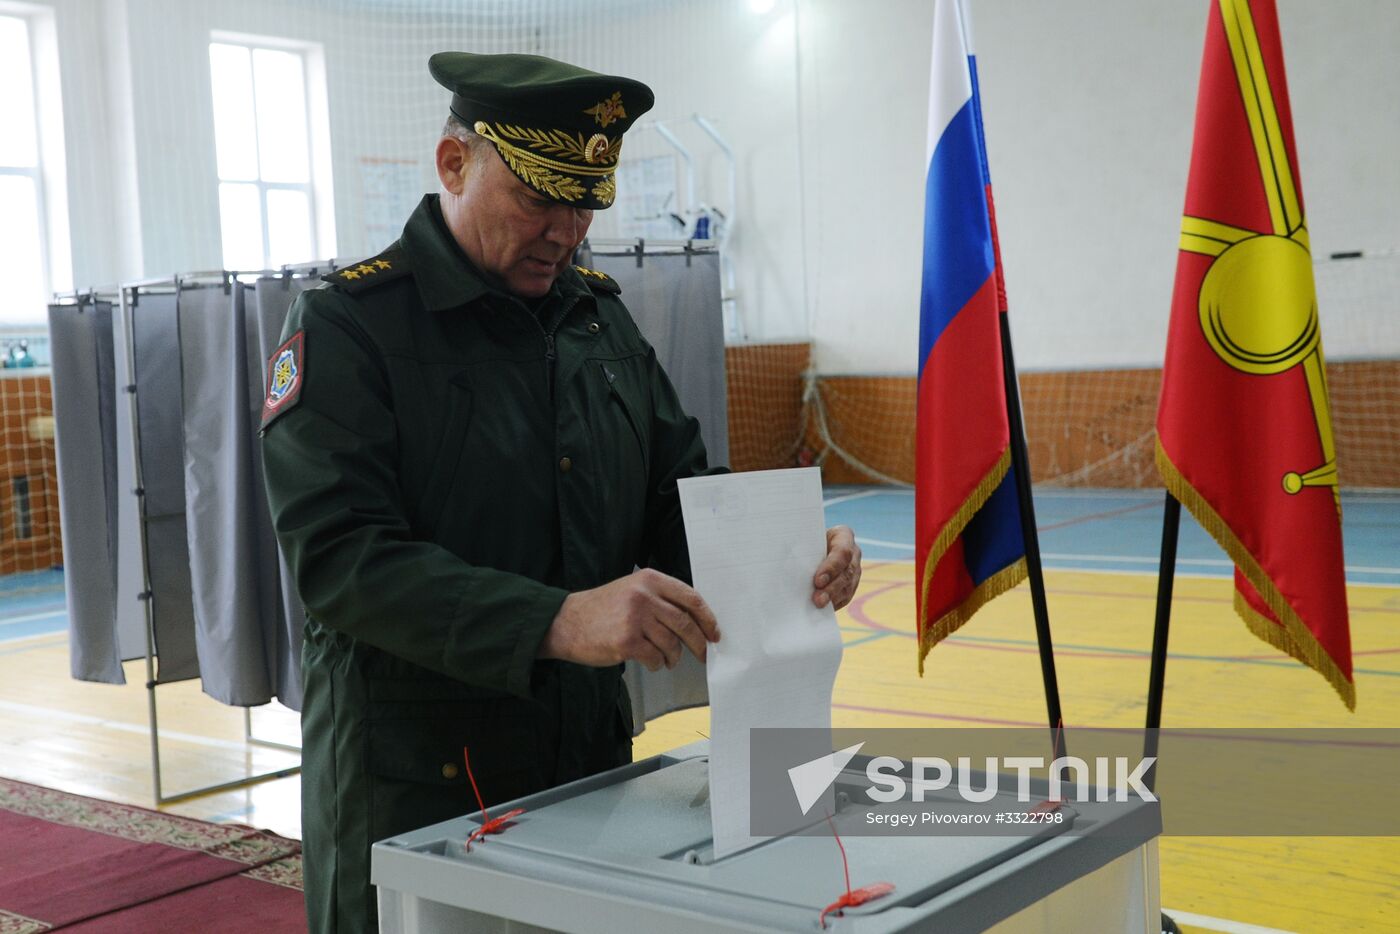 Presidential elections in Russian regions